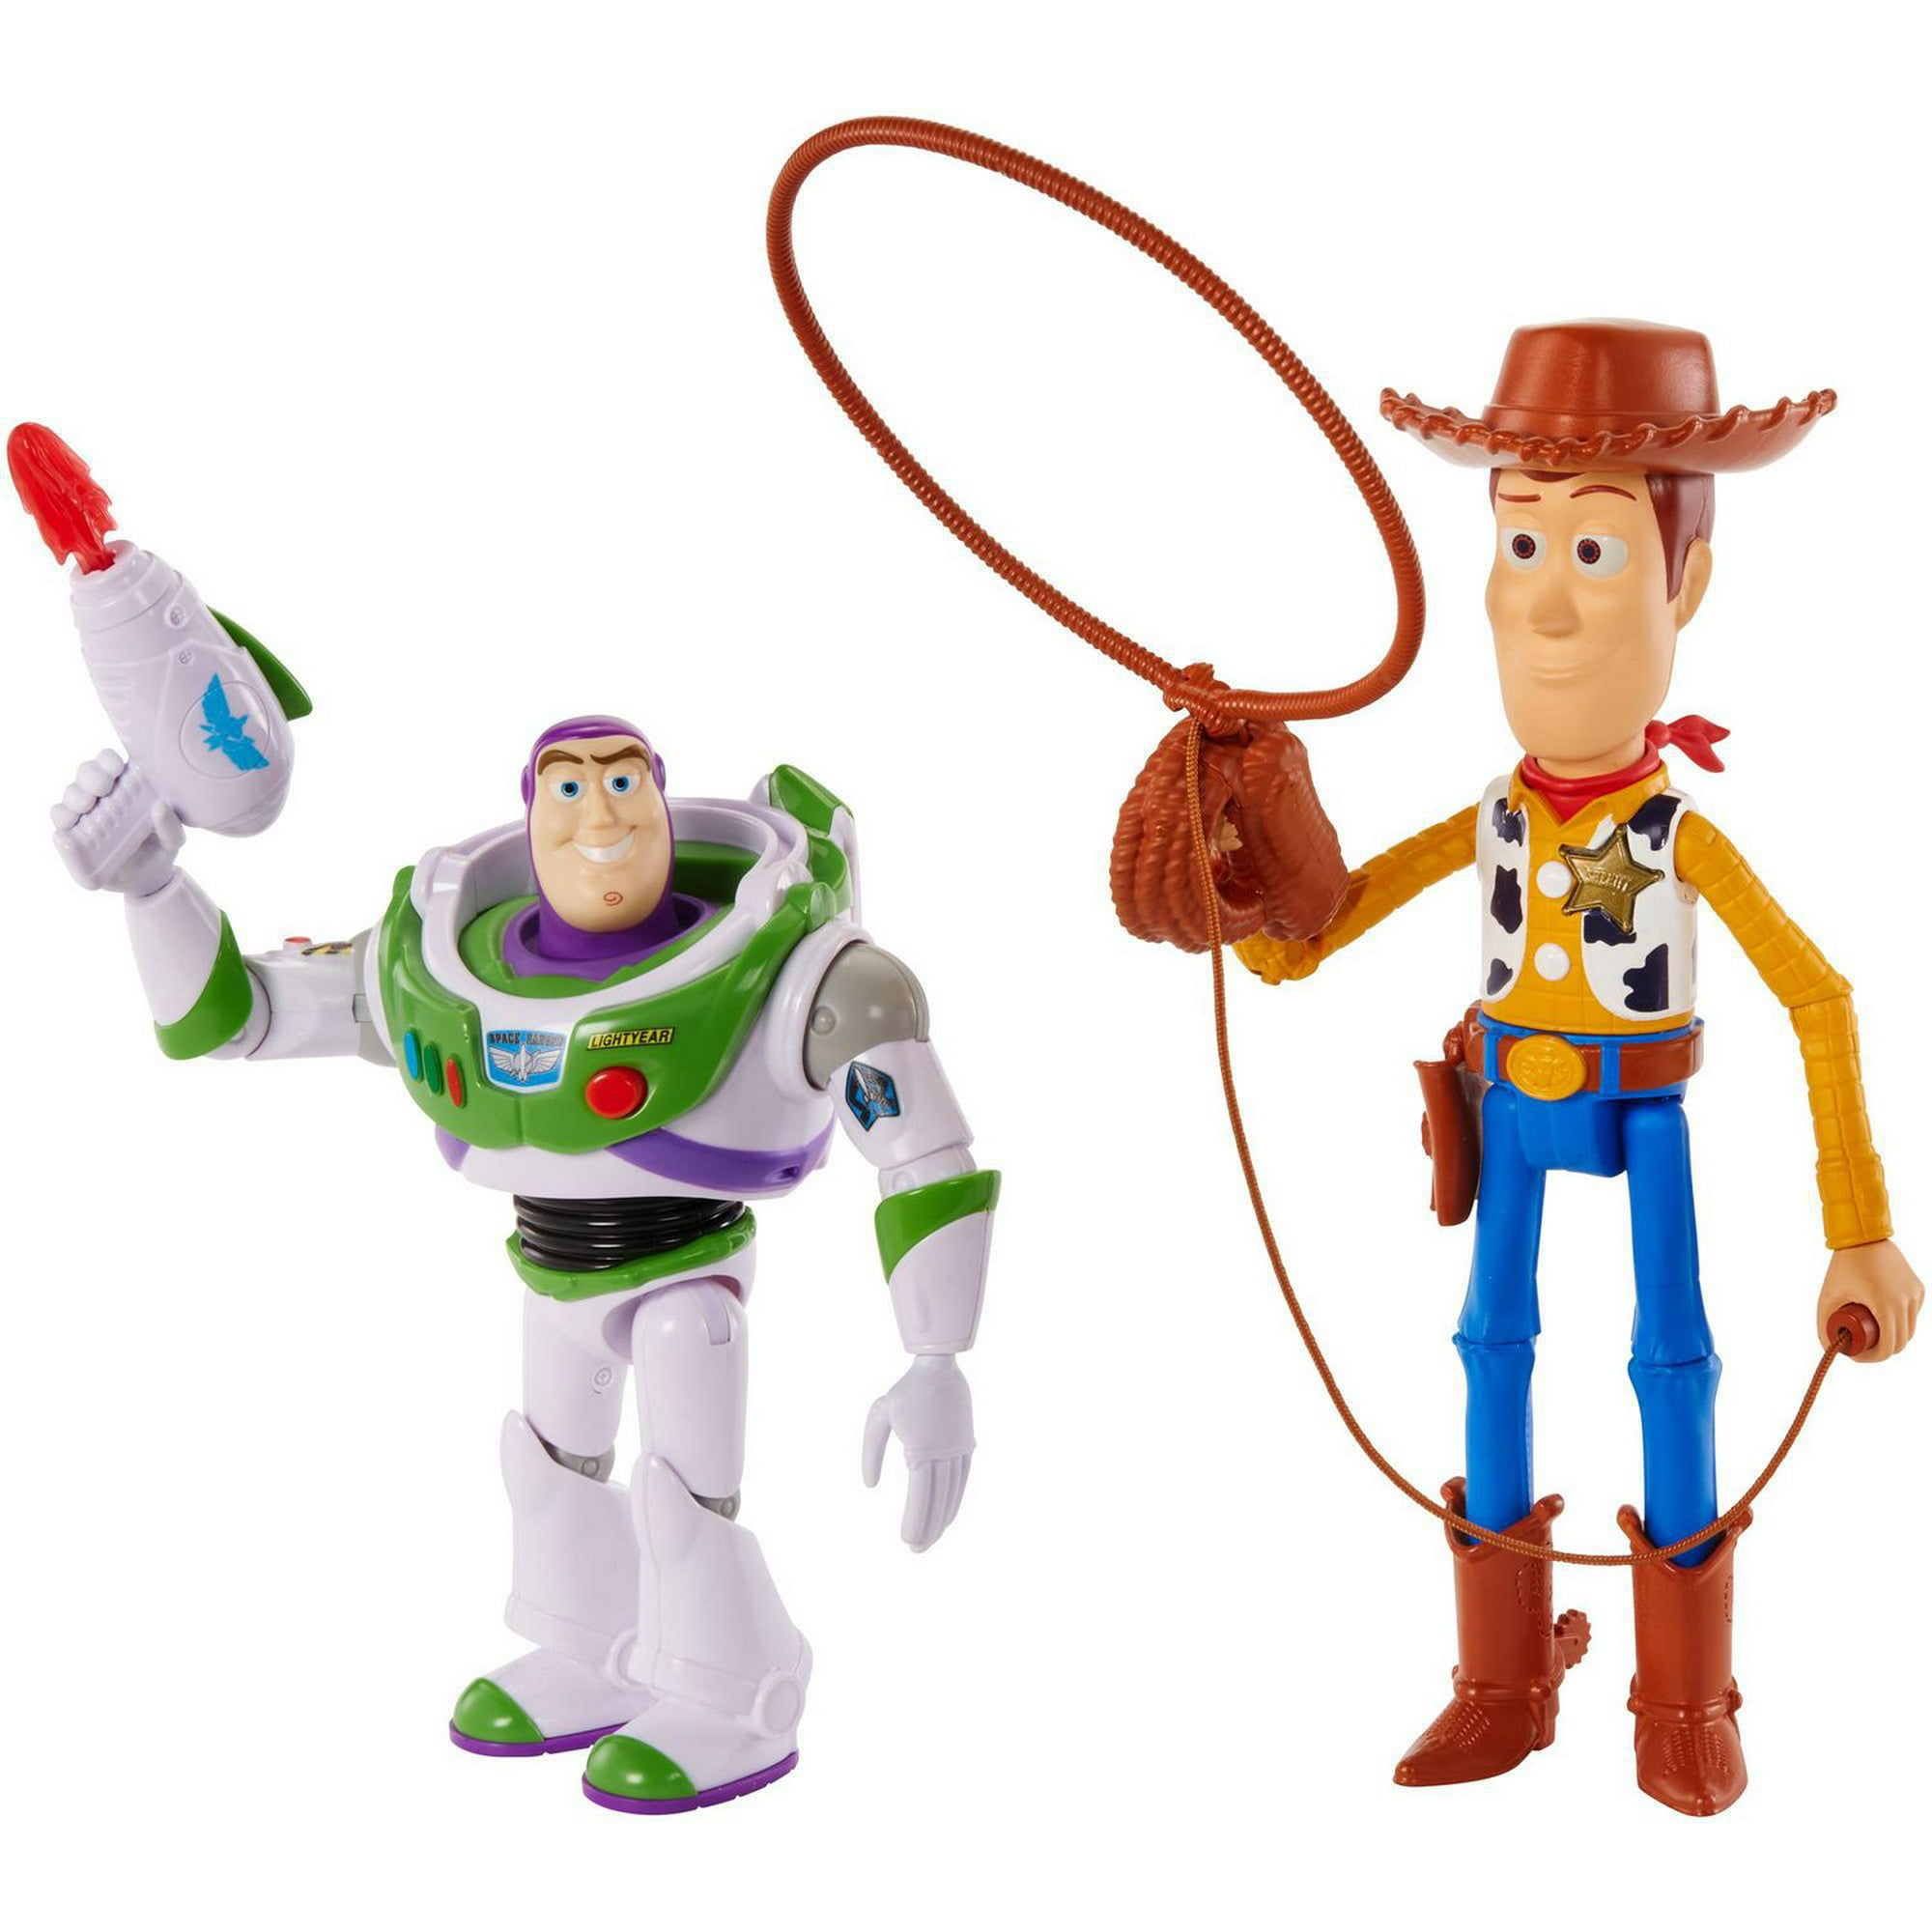 Disney Pixar Toy Story Woody and Buzz Lightyear Arcade 2-Pack